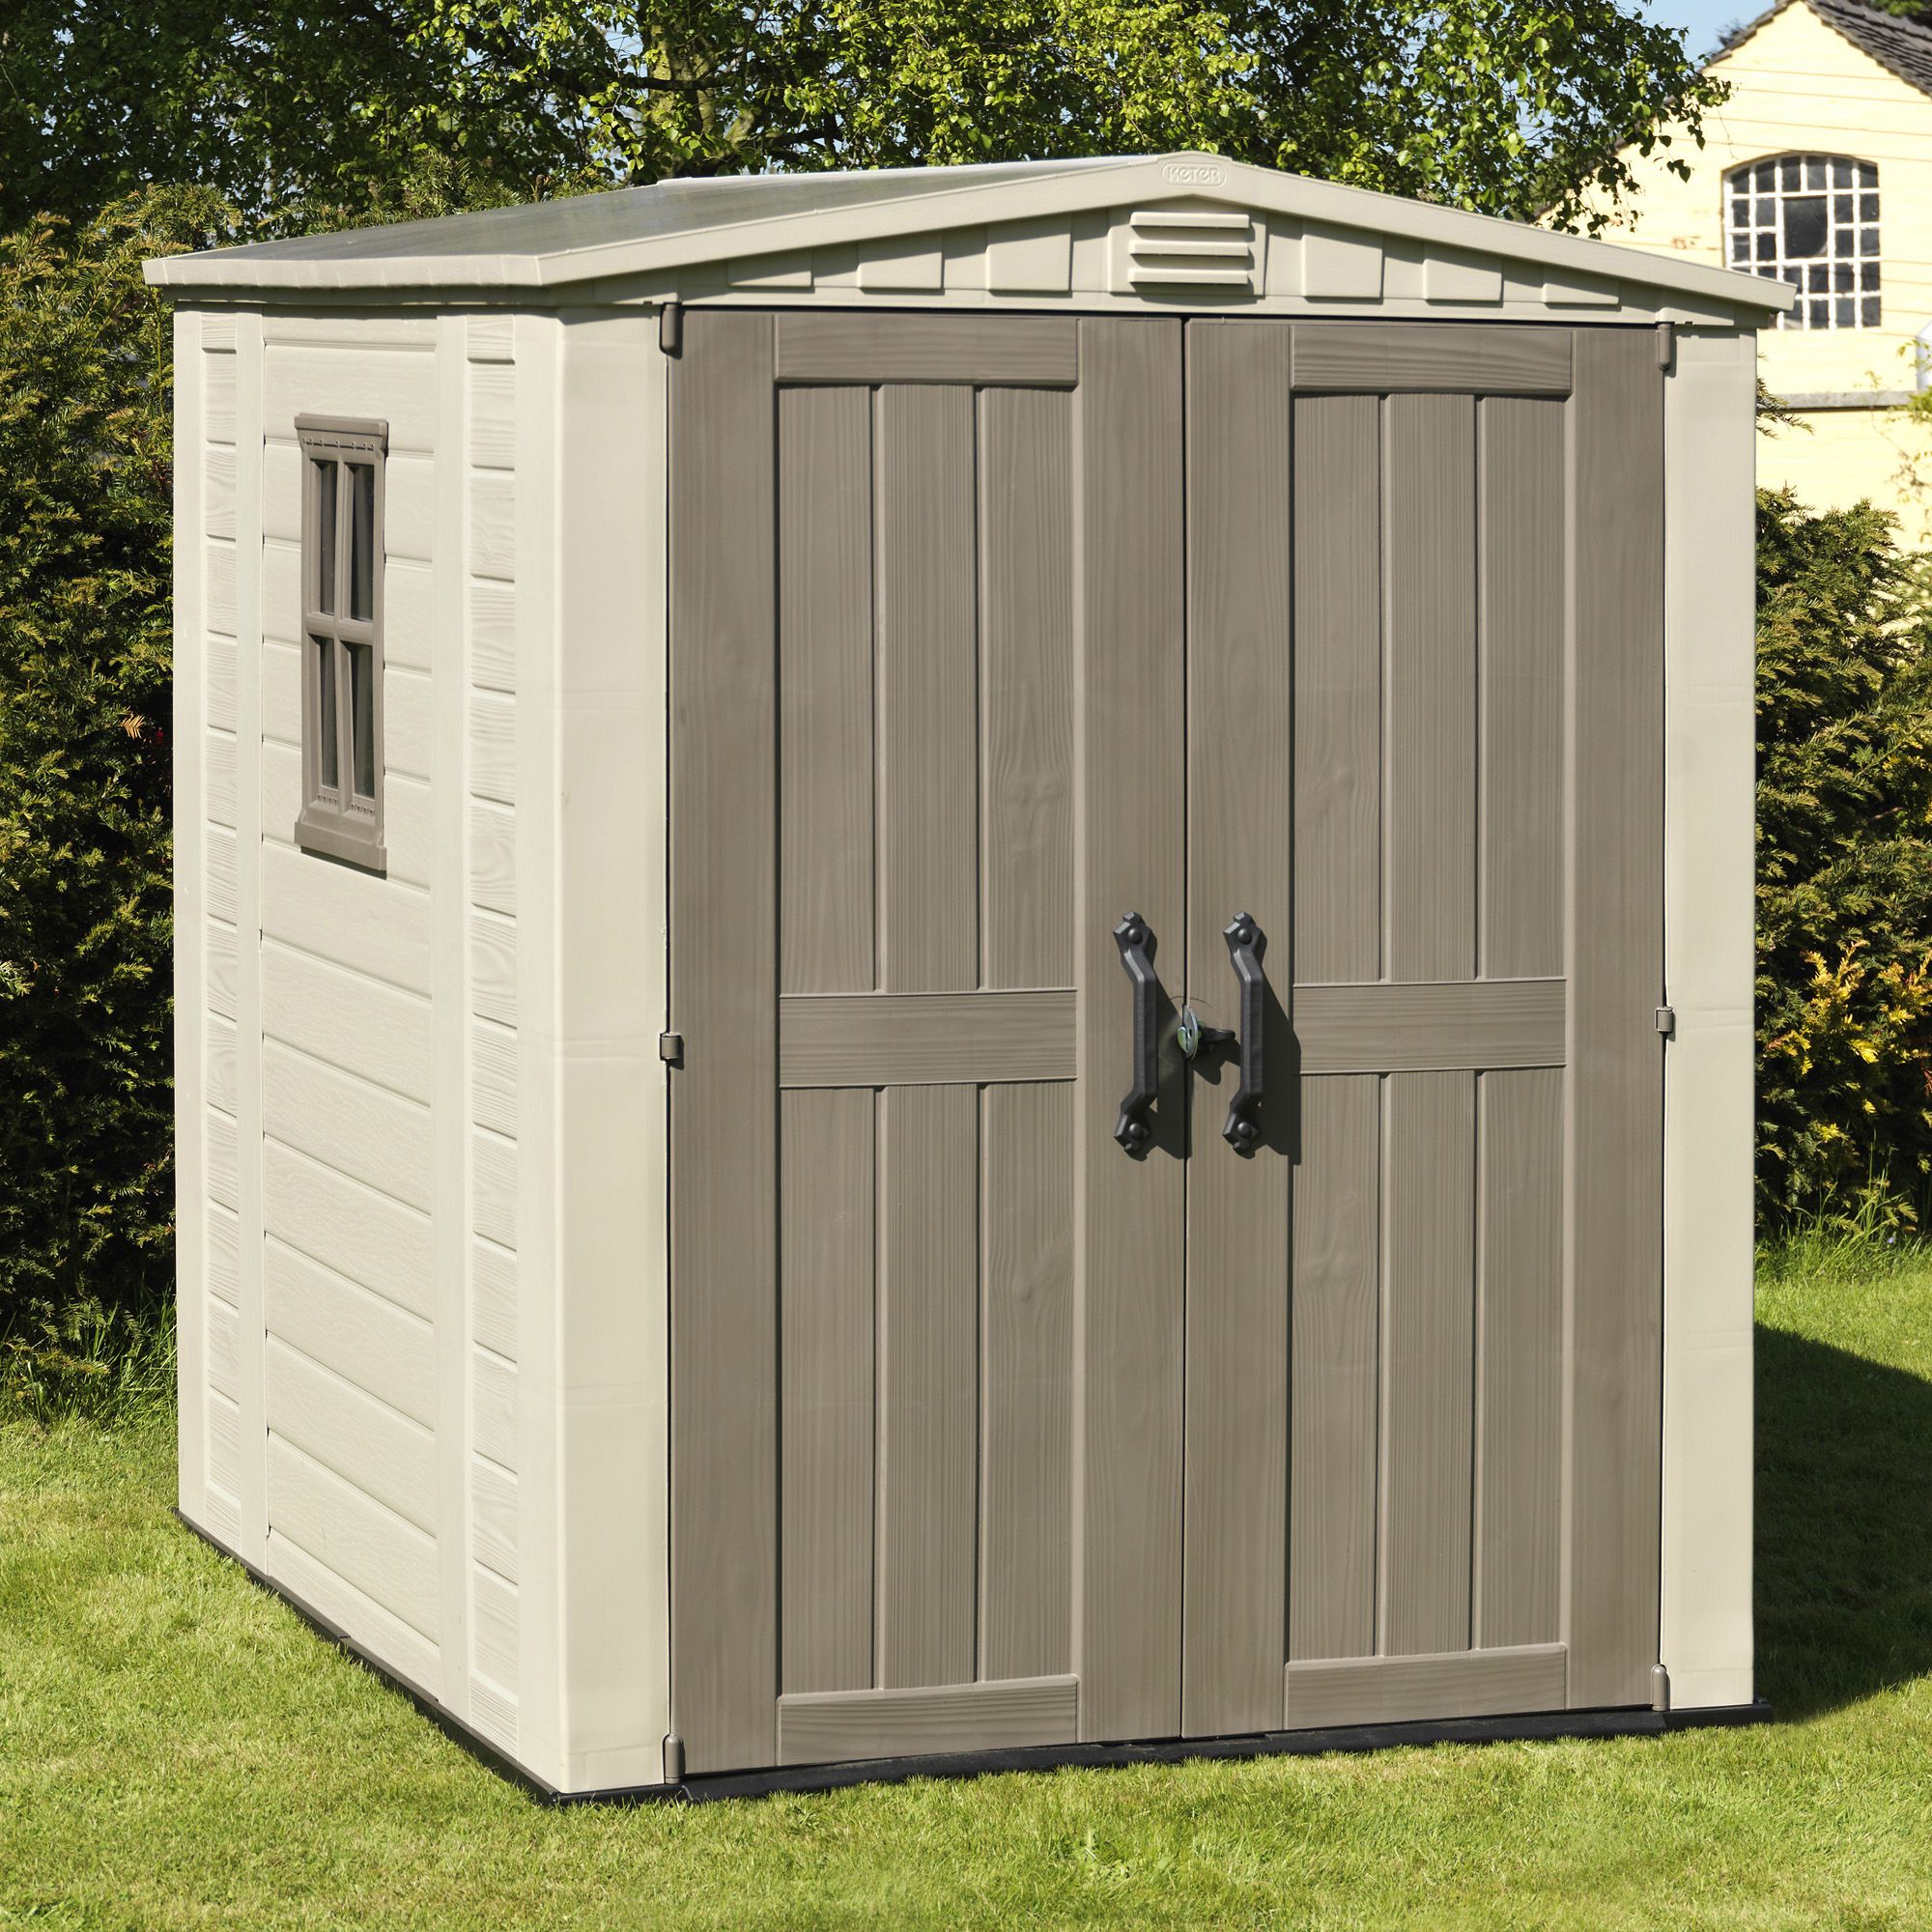 Keter Factor 6x6 Apex Plastic Shed Tradepoint